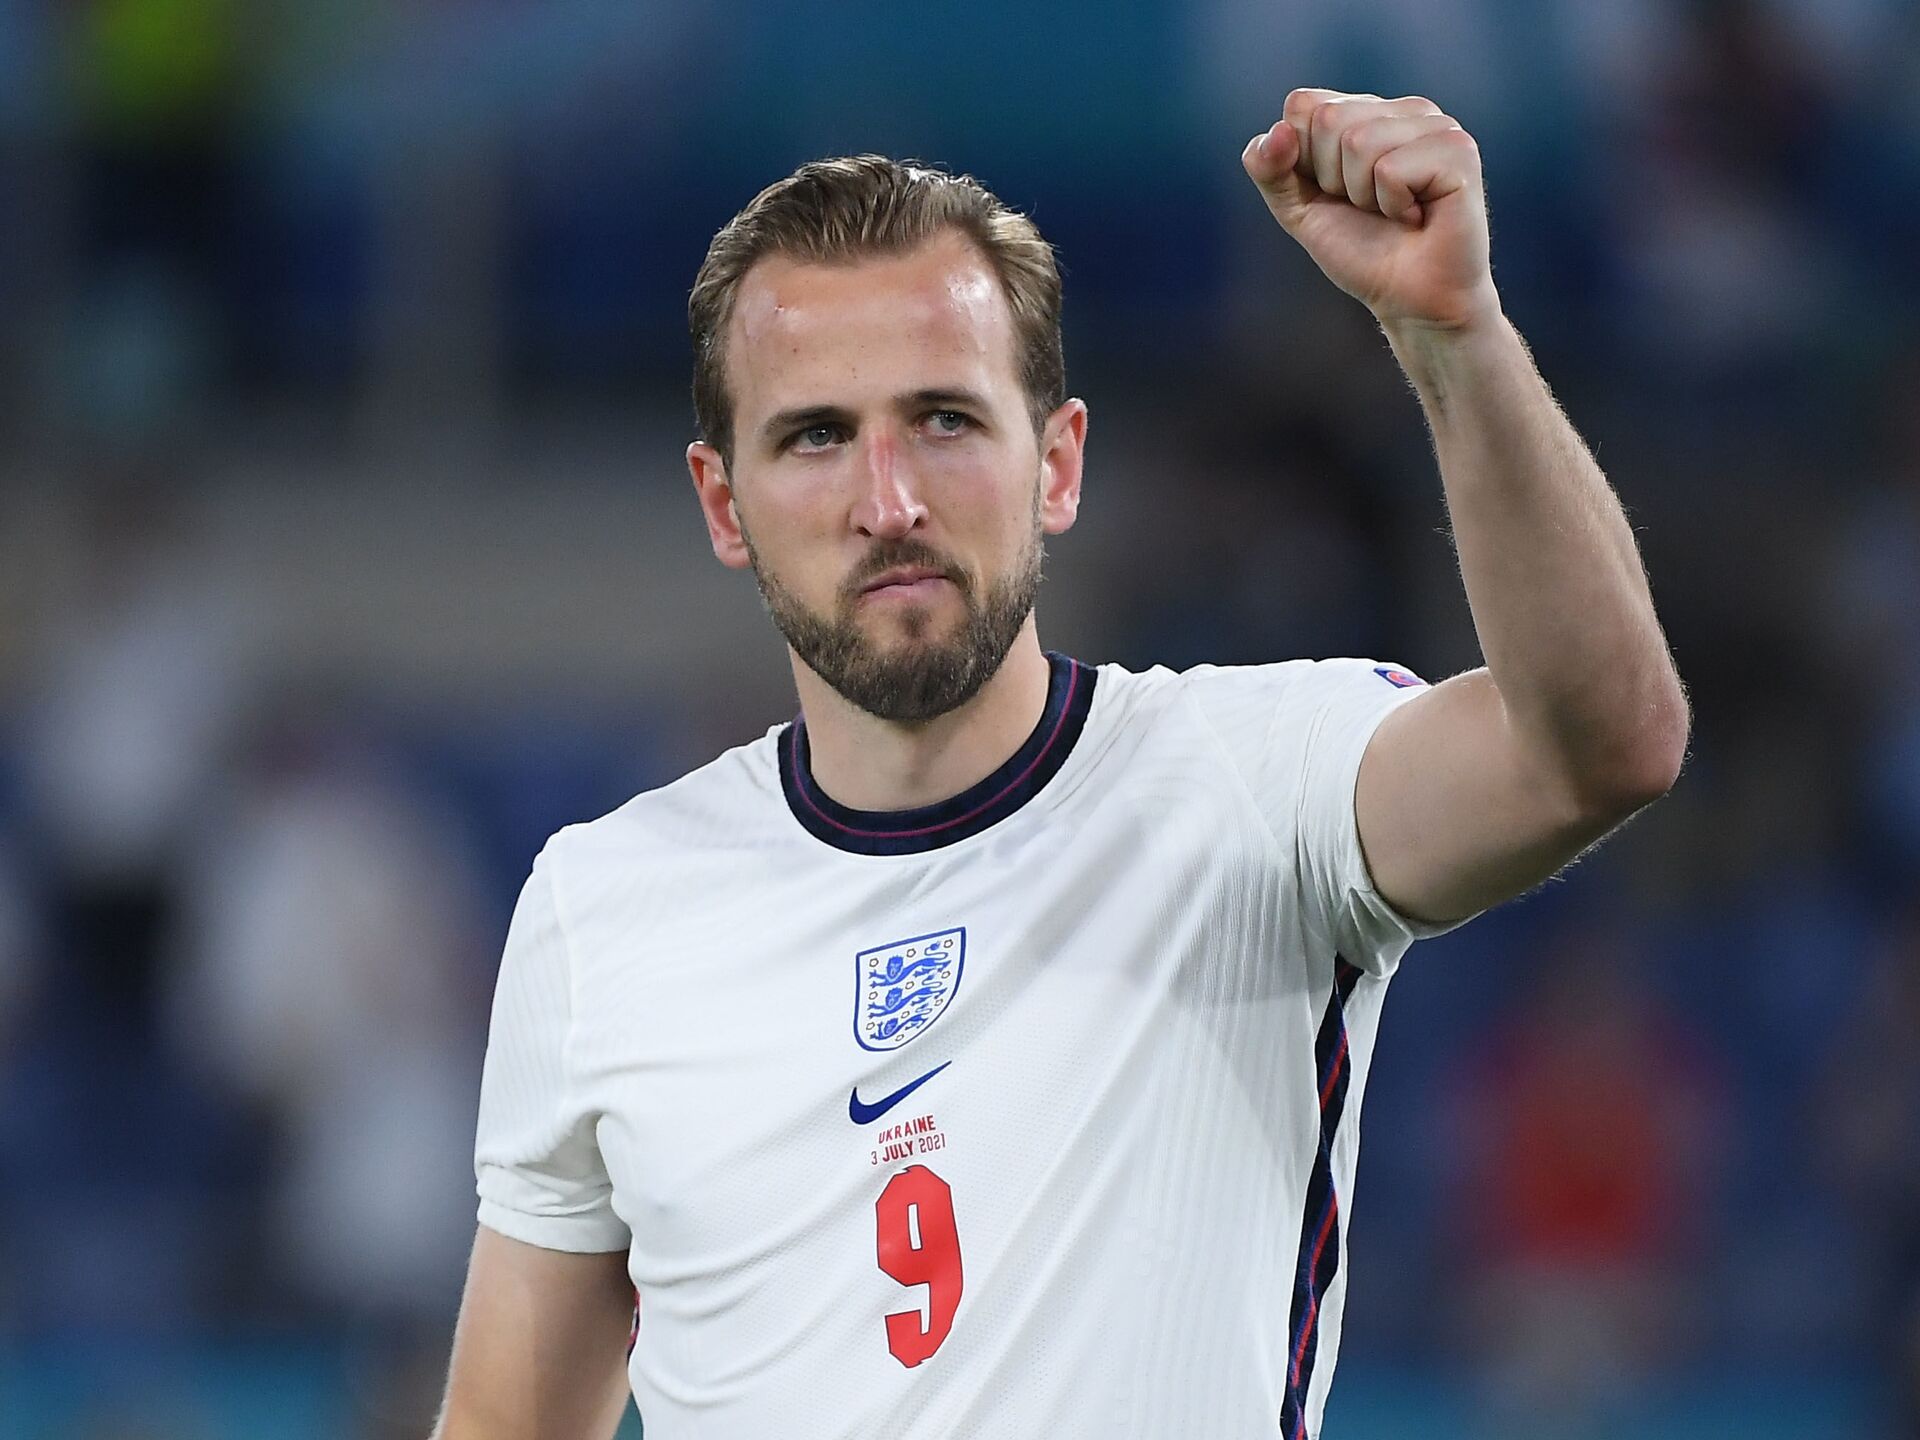 Harry Kane: I love scoring goals, especially for my country